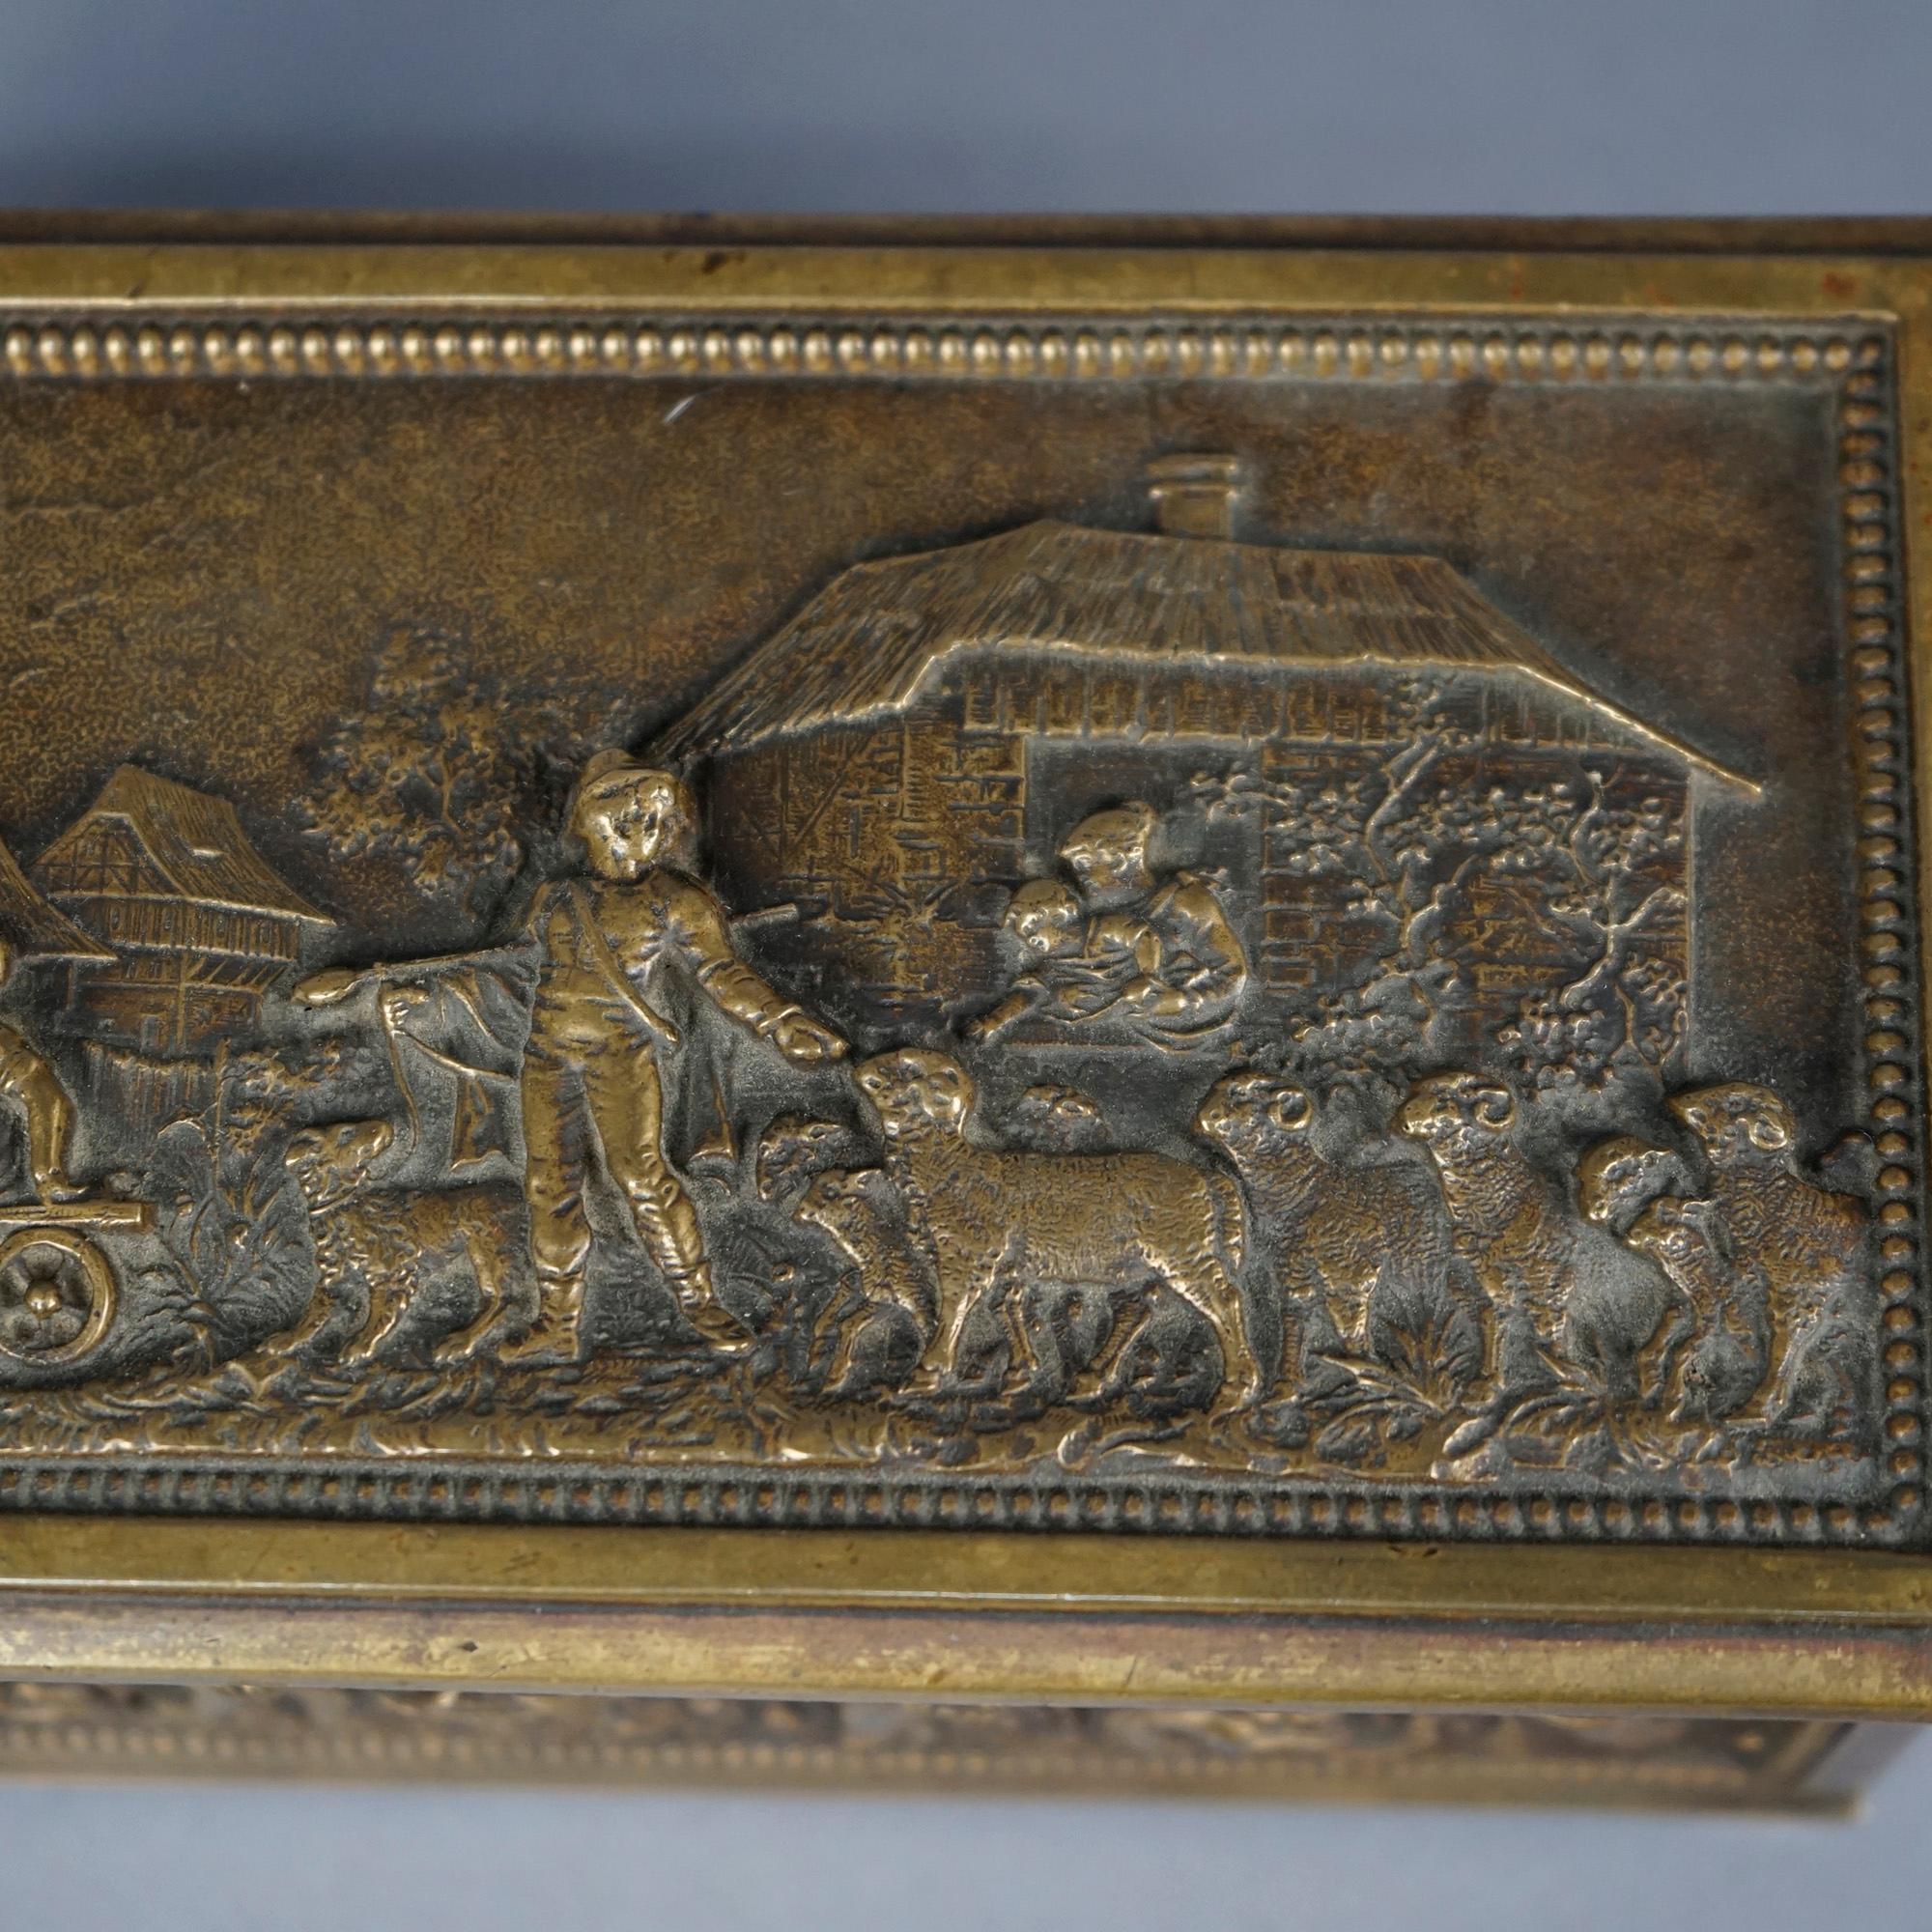 Antique Bronze Box, Continental Genre Scene with Figures in High Relief 19th C 4